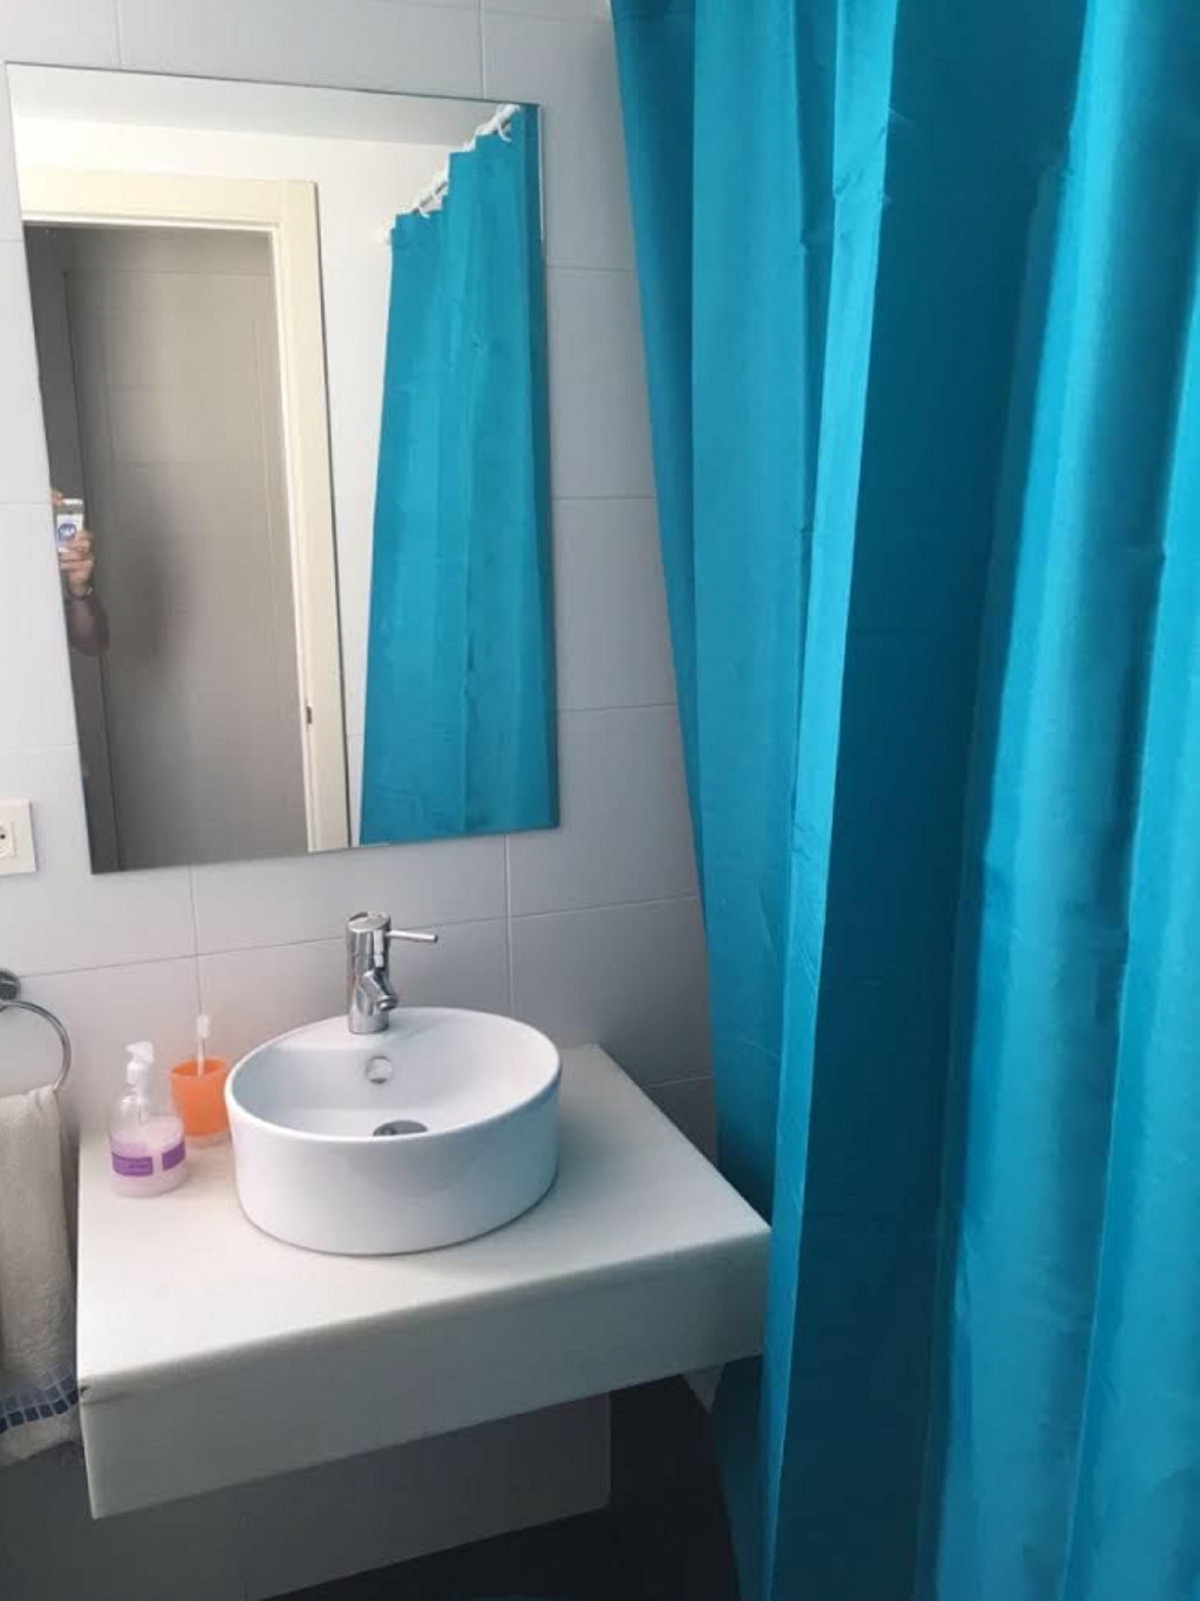 3 bedroom Apartment For Sale in Valle Romano, Málaga - thumb 6